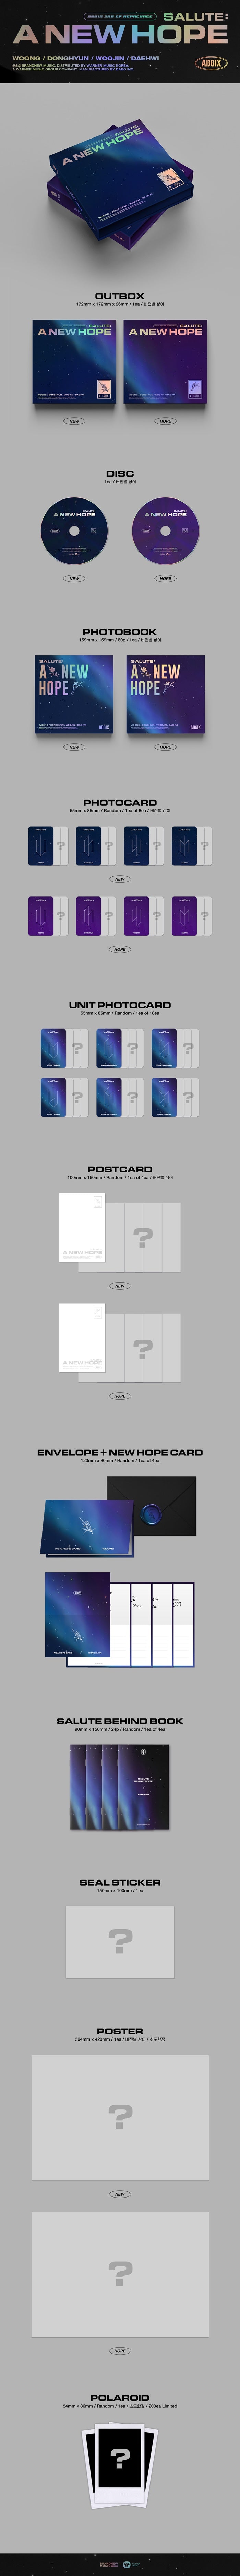 1 CD
1 Photo Book (80 pages)
1 Photo Card
1 Unit Card
1 Post
1 Envelope&hope Card
1 Behind Book (24 pages)
1 Sticker